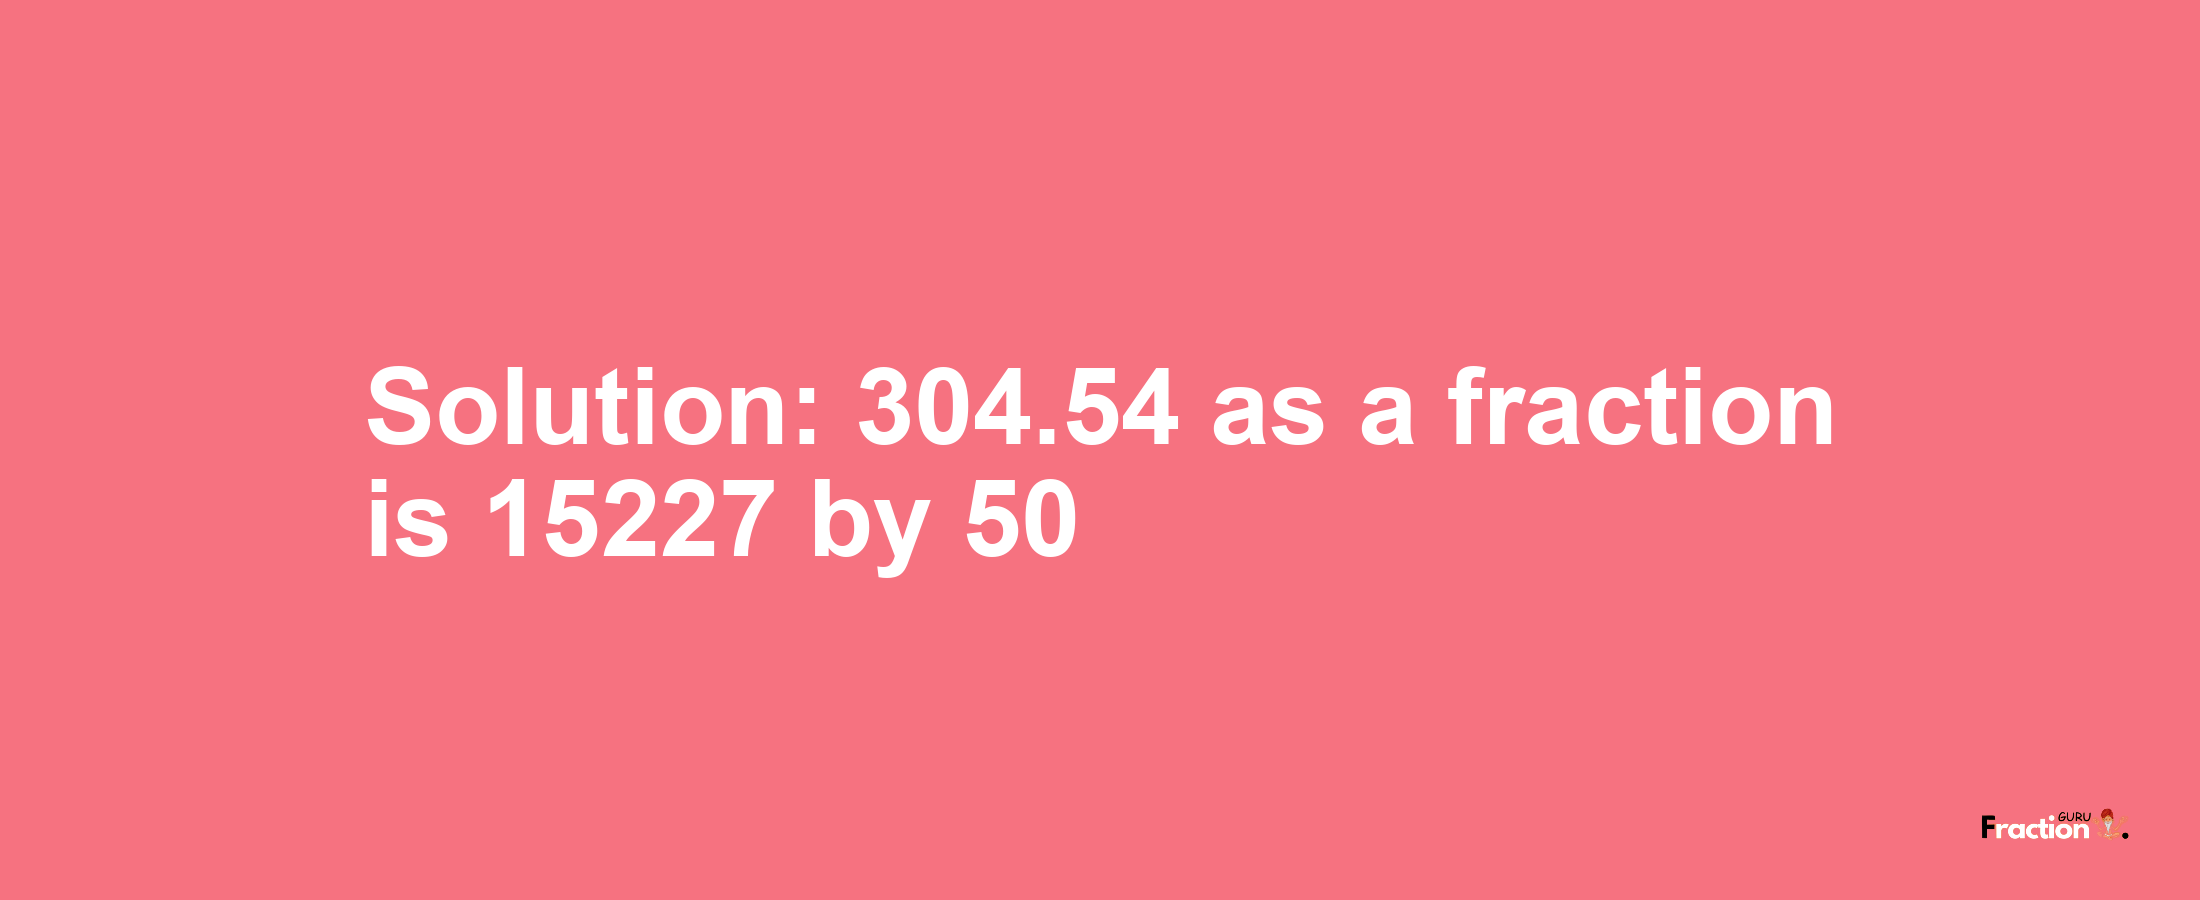 Solution:304.54 as a fraction is 15227/50